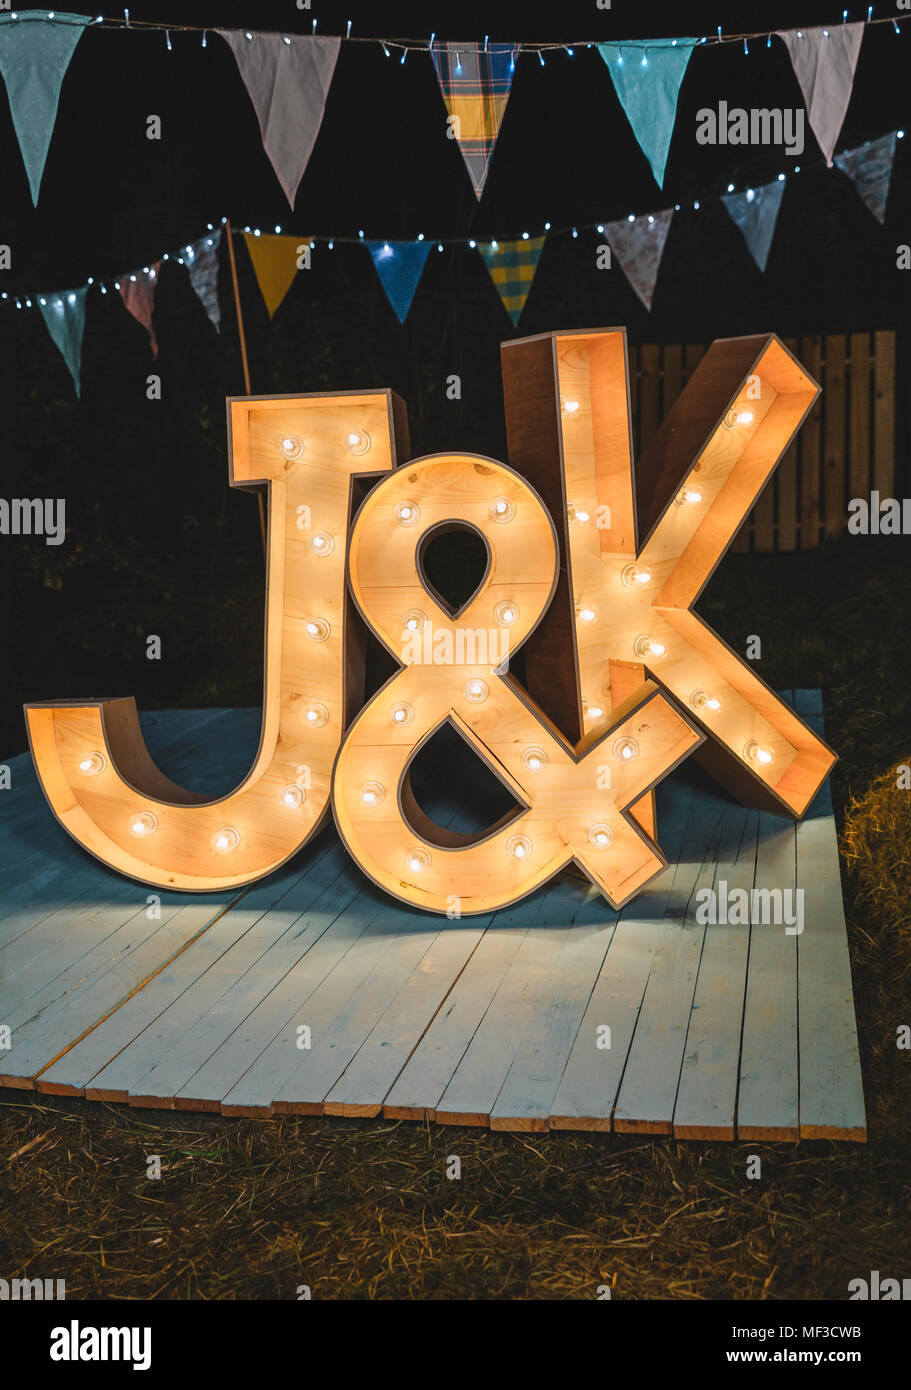 Handmade wooden letters illuminated with light bulbs on a night field party Stock Photo